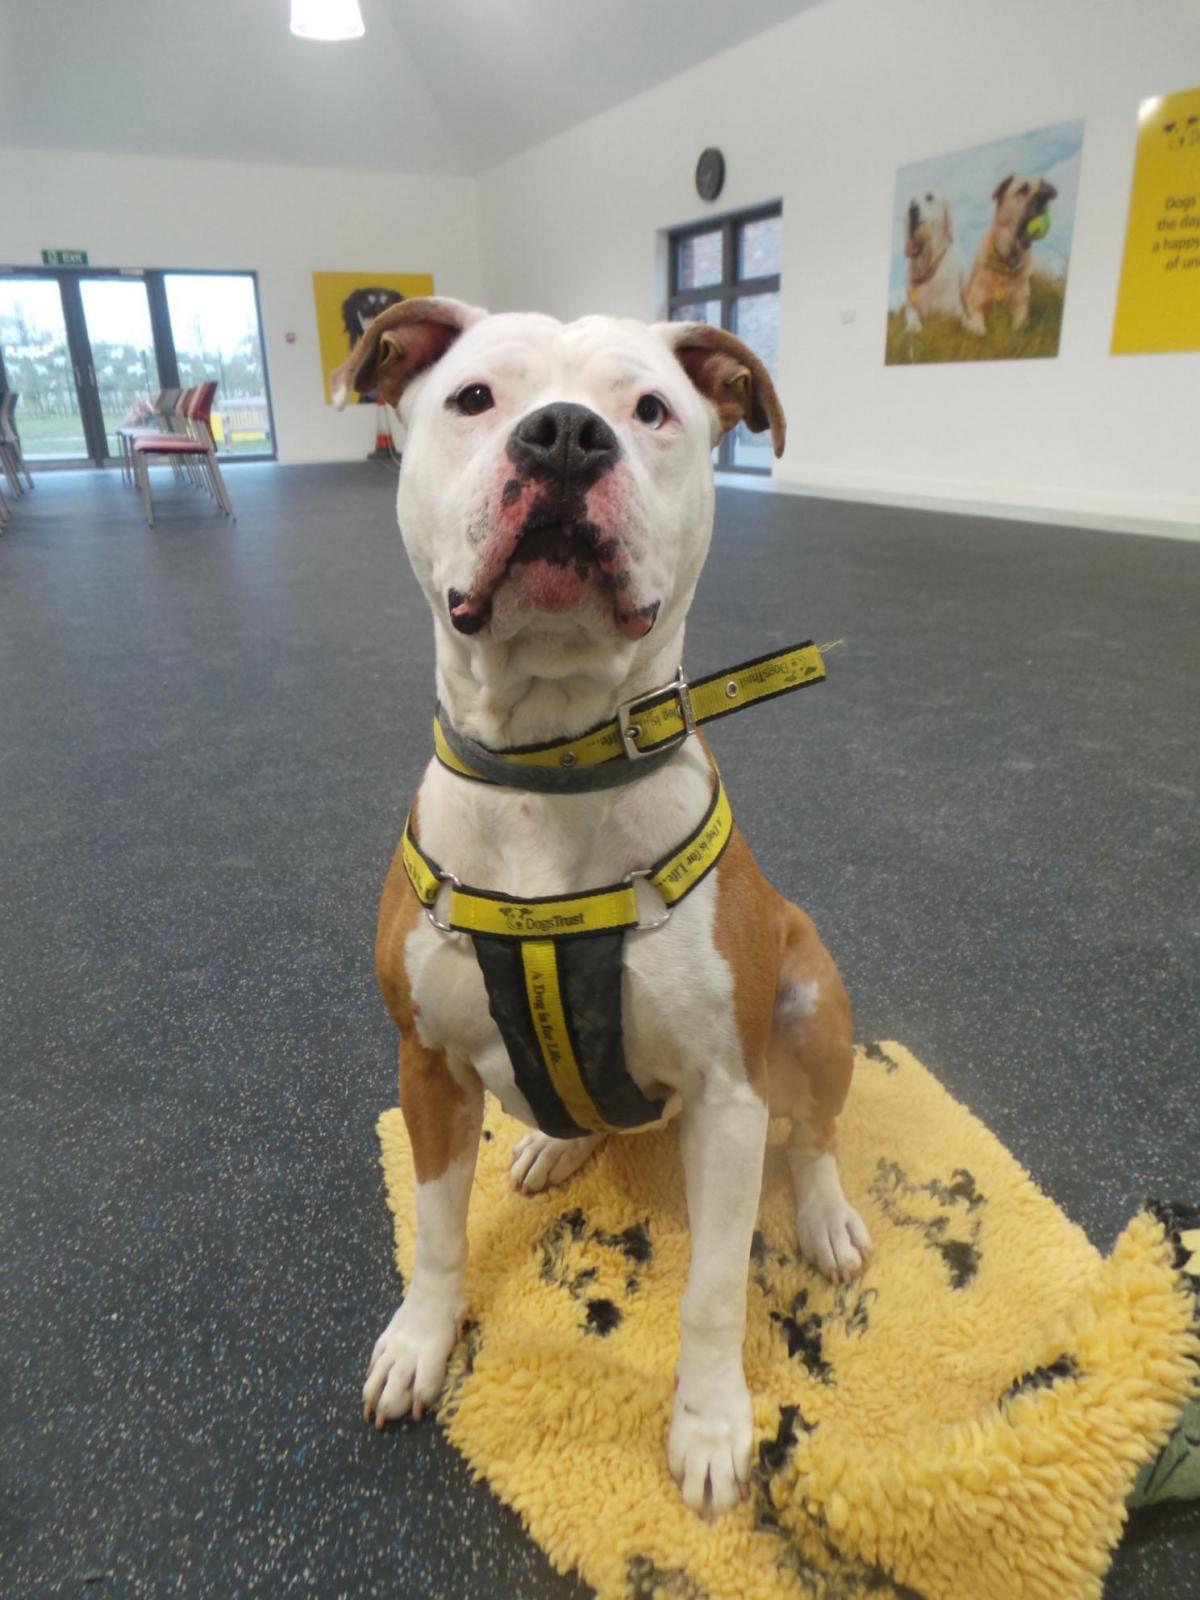 11/02/2015
Sassy is a three year old American Bulldog. Sassy’s ideal home would see her being the only pet .She is a friendly girl but due to her strength would be best suited to an adult  home or with  older children. 
